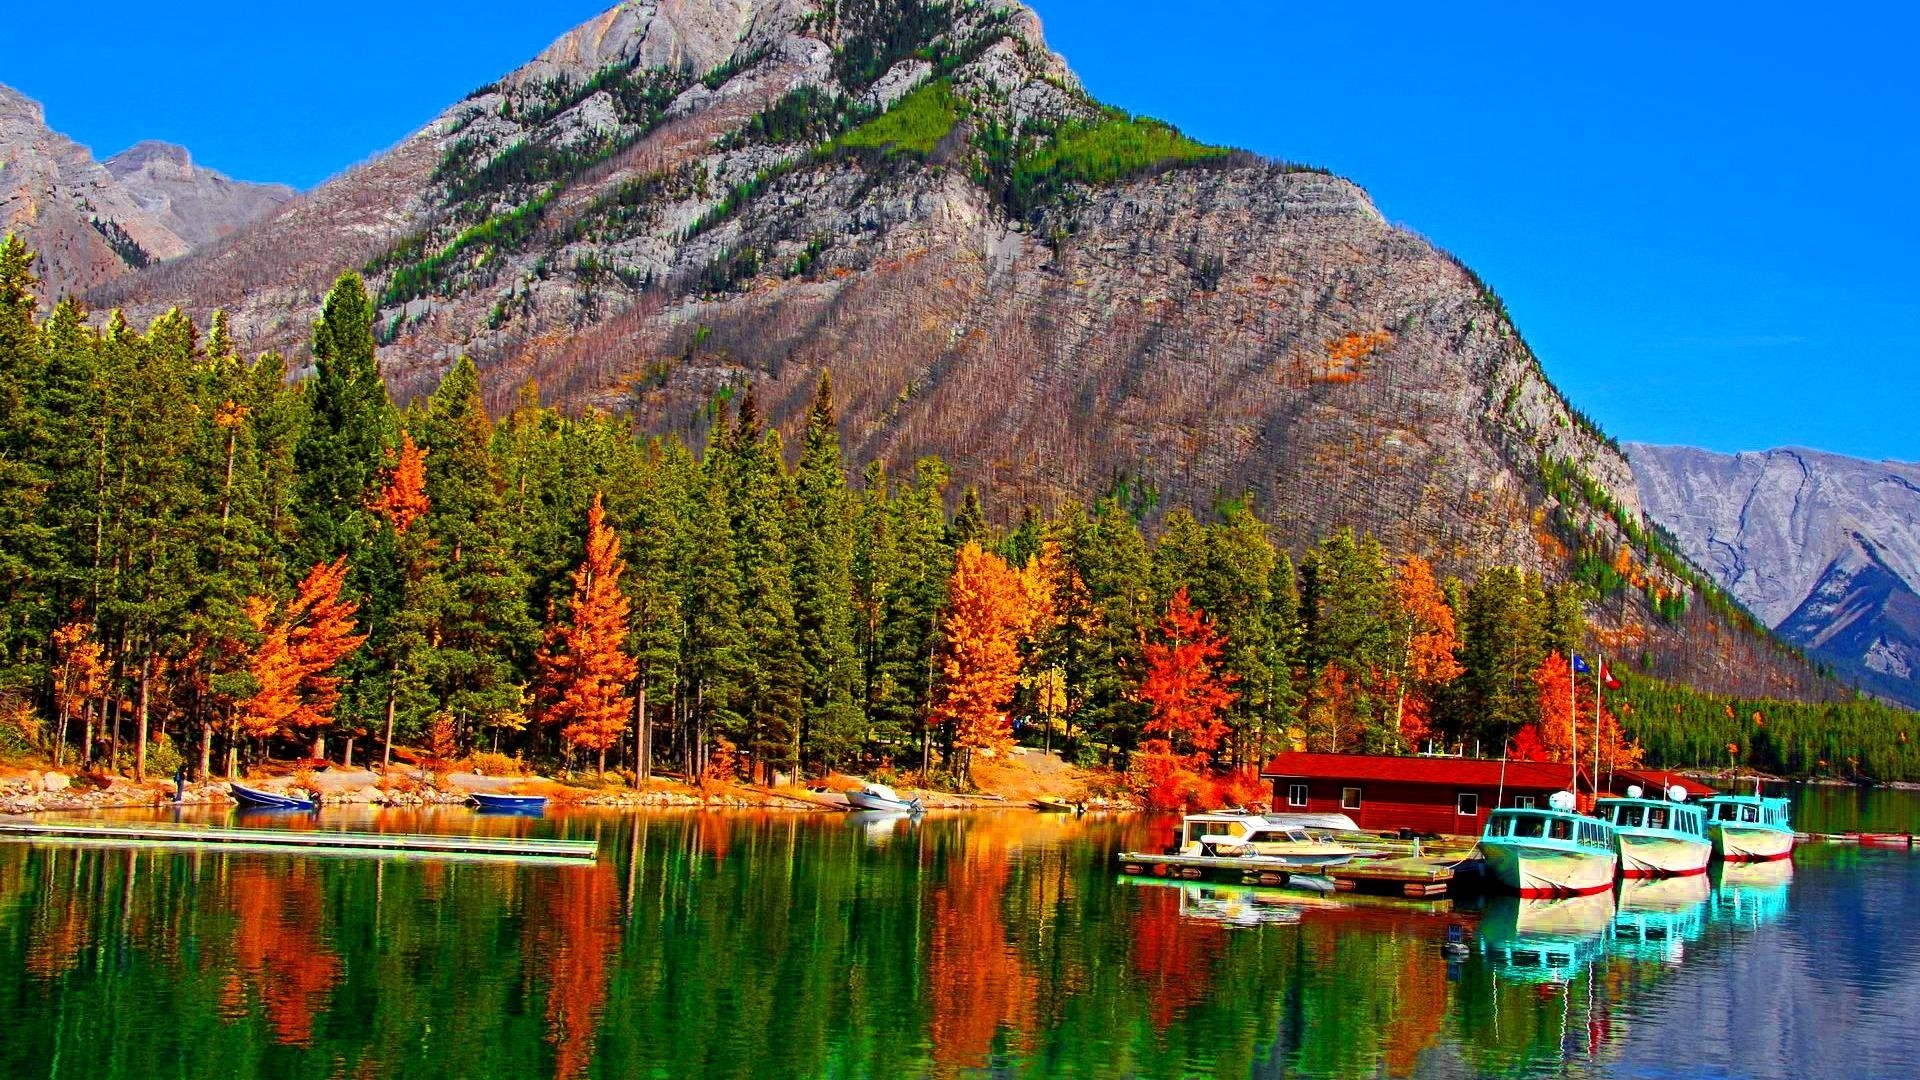 1920x1080 Fall Colors Lake Banff Canada Mountain Reflection Boats Autumn Forest Docks  Wallpaper - 